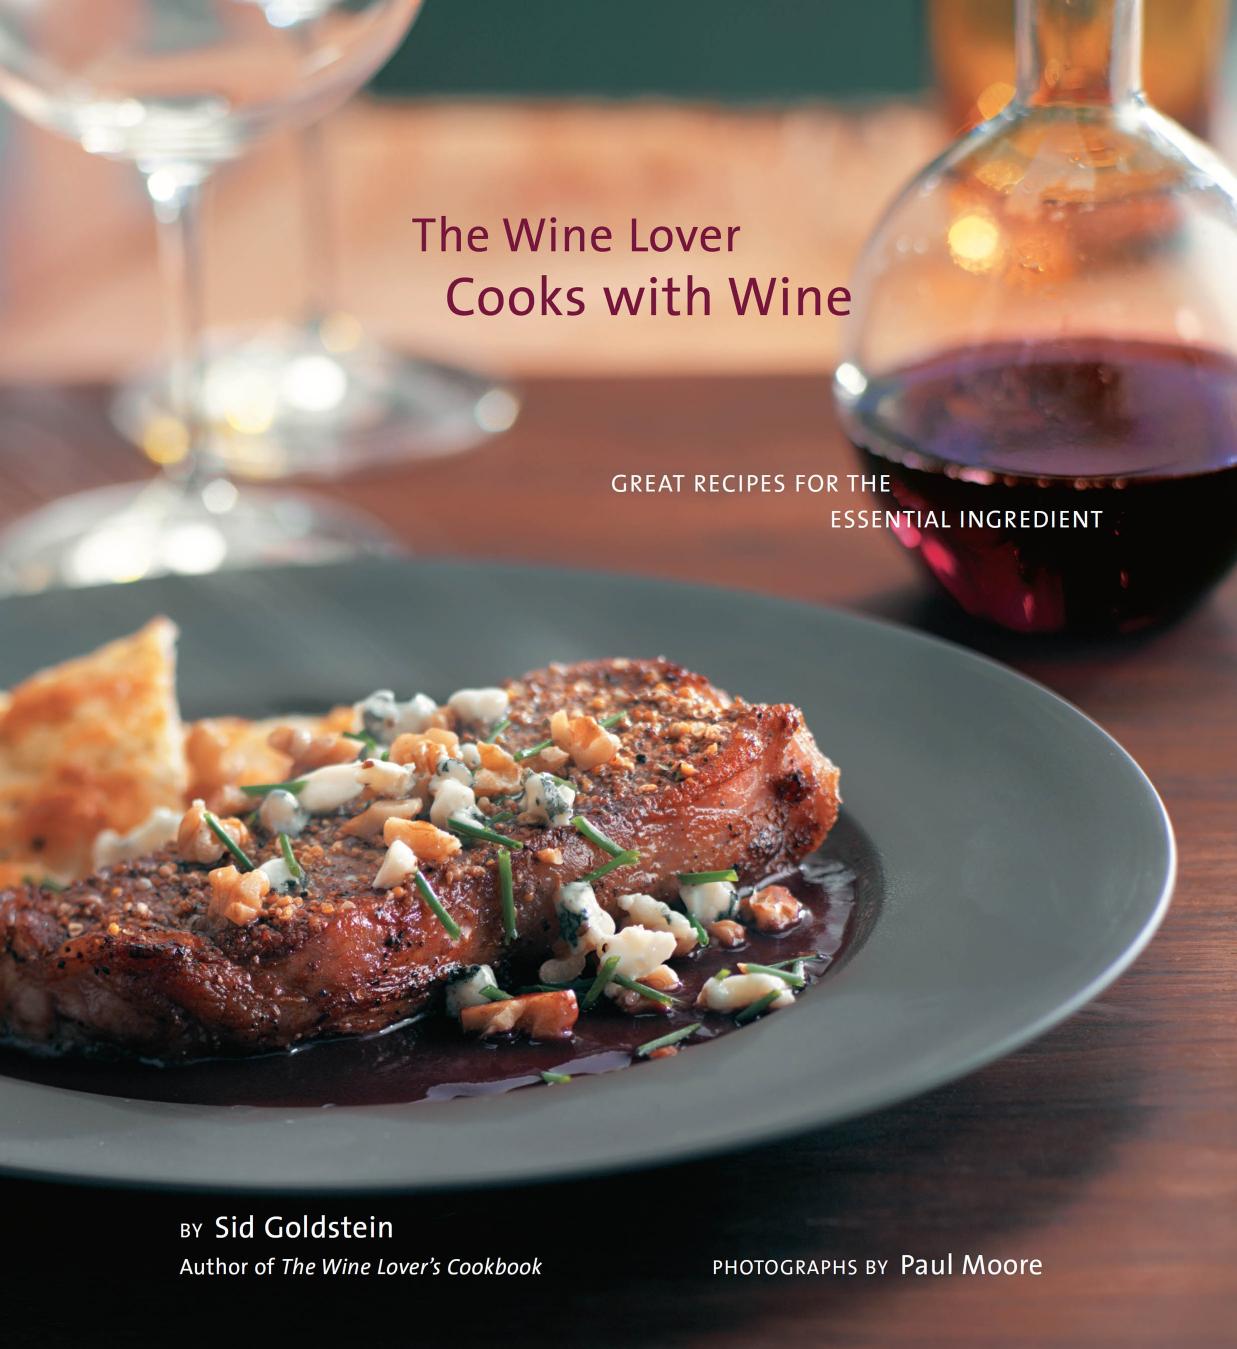 The Wine Lover Cooks with Wine by Sid Goldstein